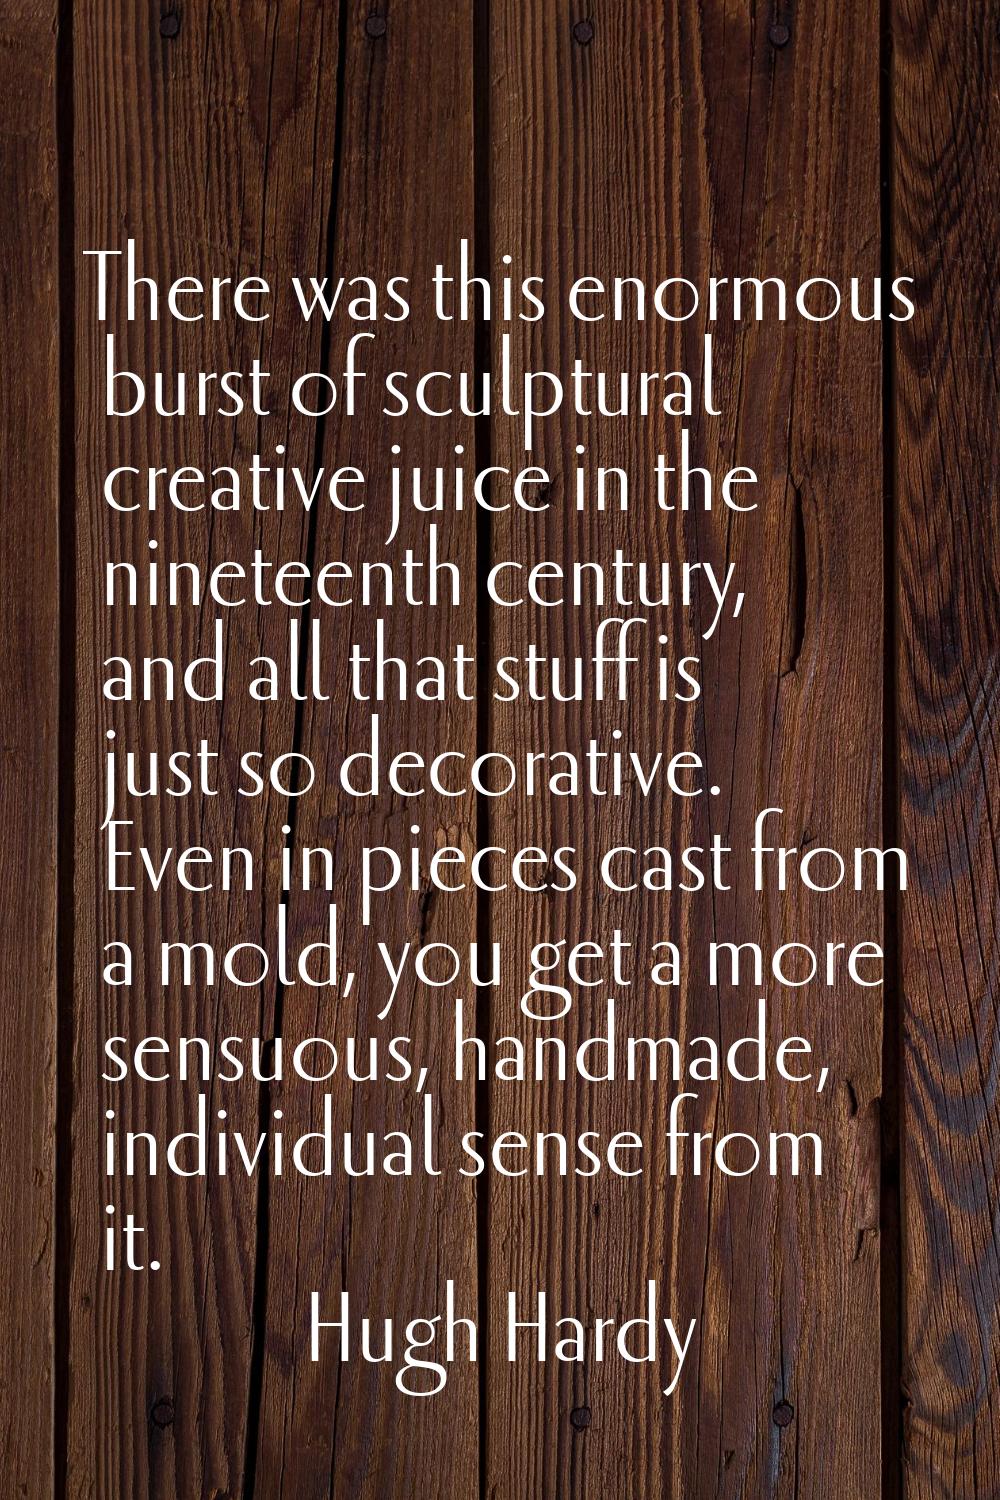 There was this enormous burst of sculptural creative juice in the nineteenth century, and all that 